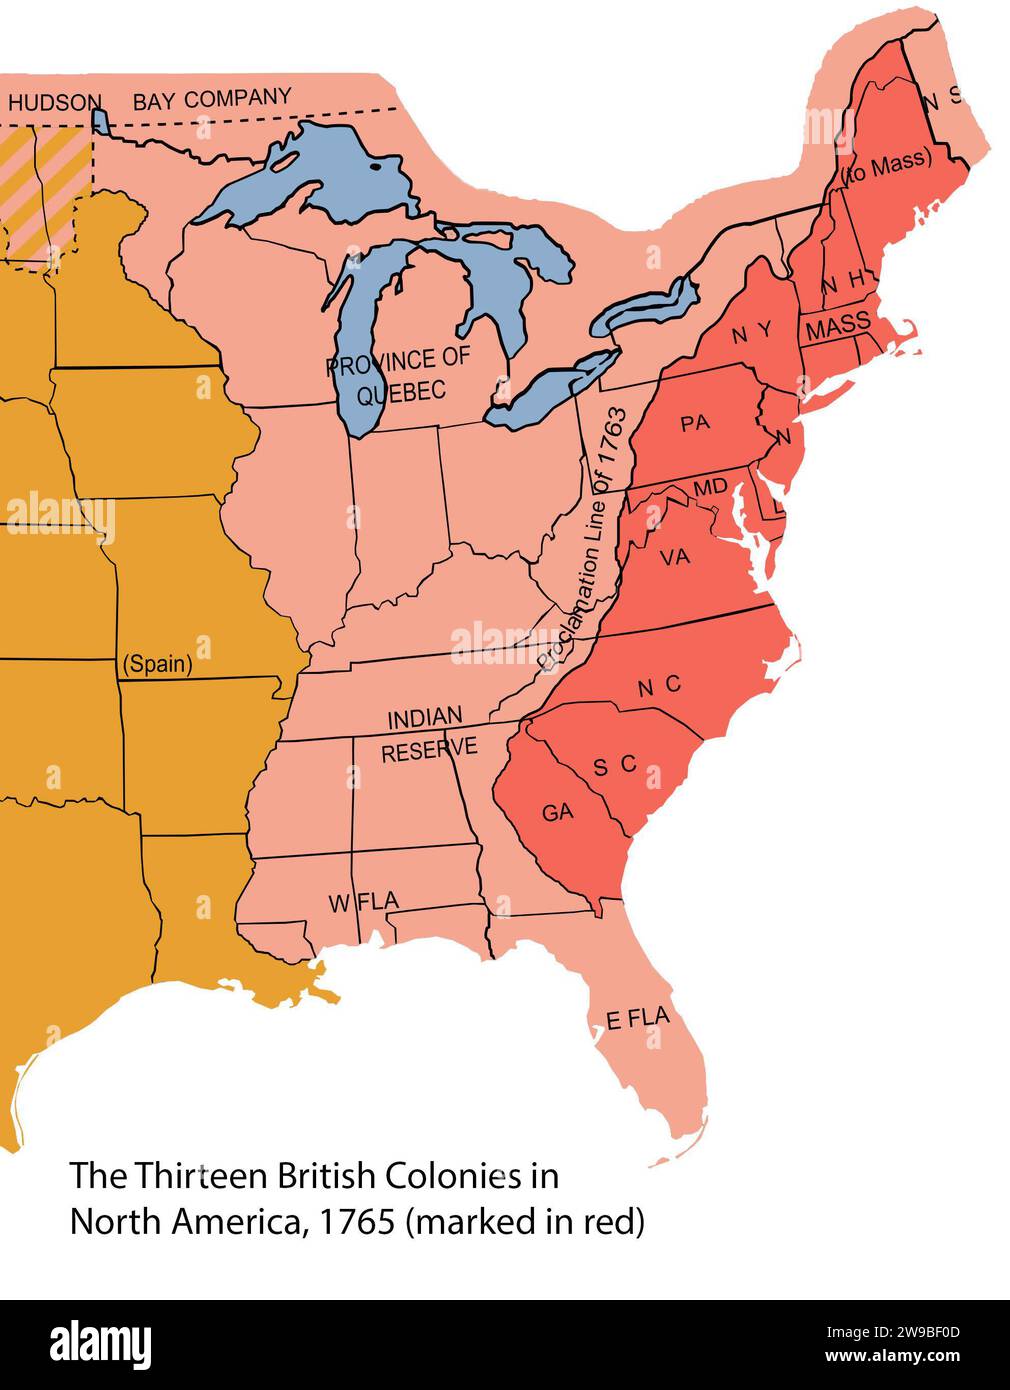 Thirteen Colonies. Map of the 13 British colonies in North America, 1765 (marked in red) with modern borders overlaid Stock Photo